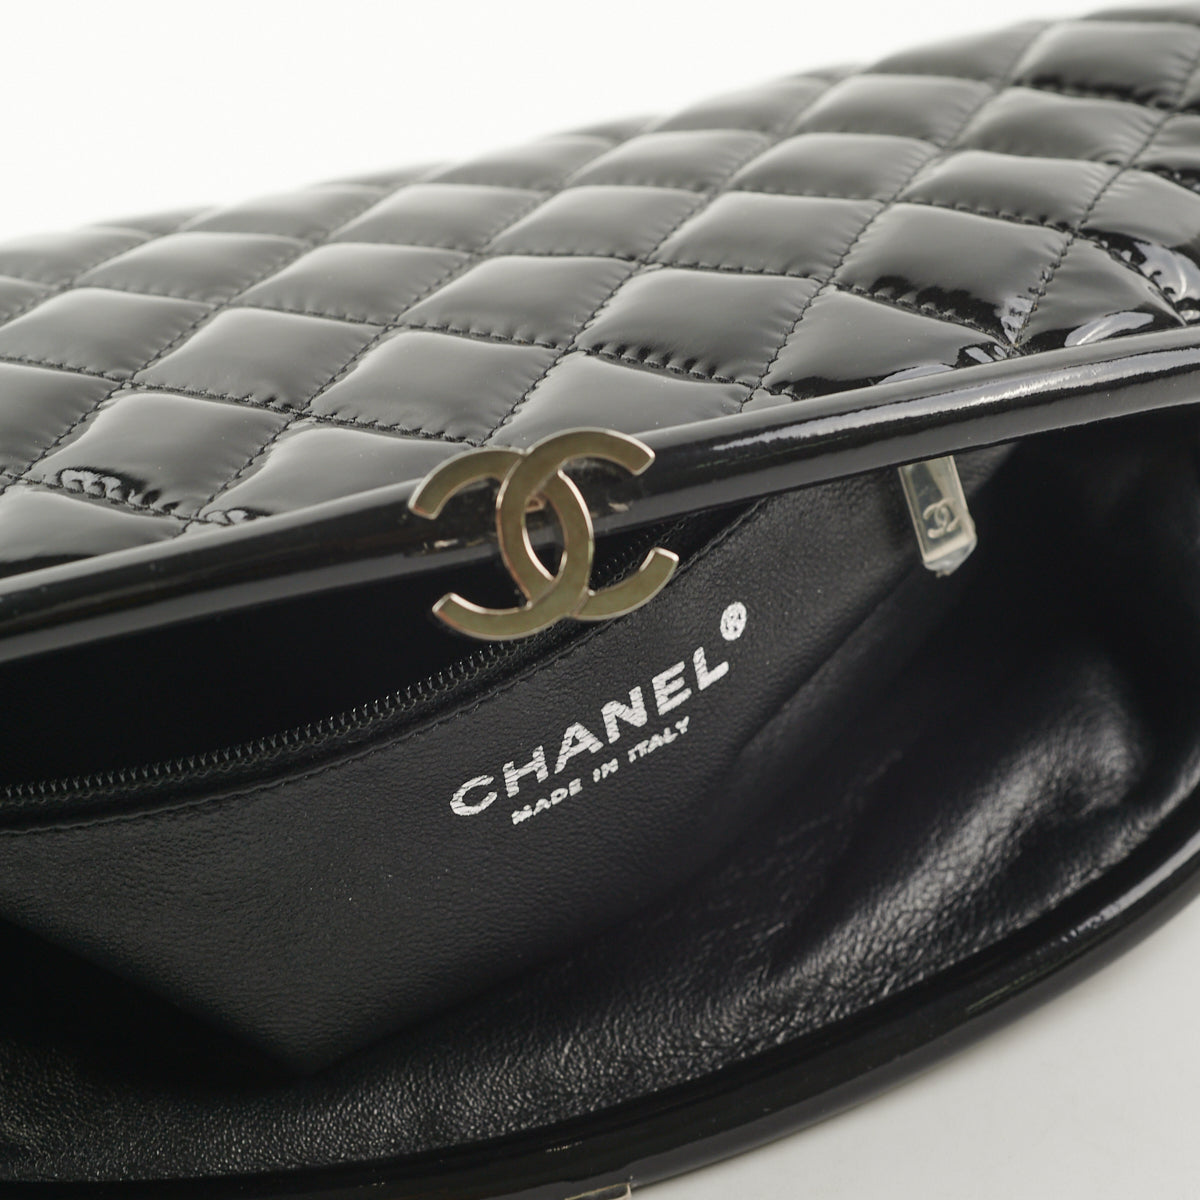 Timeless/classique leather purse Chanel Black in Leather - 32149860